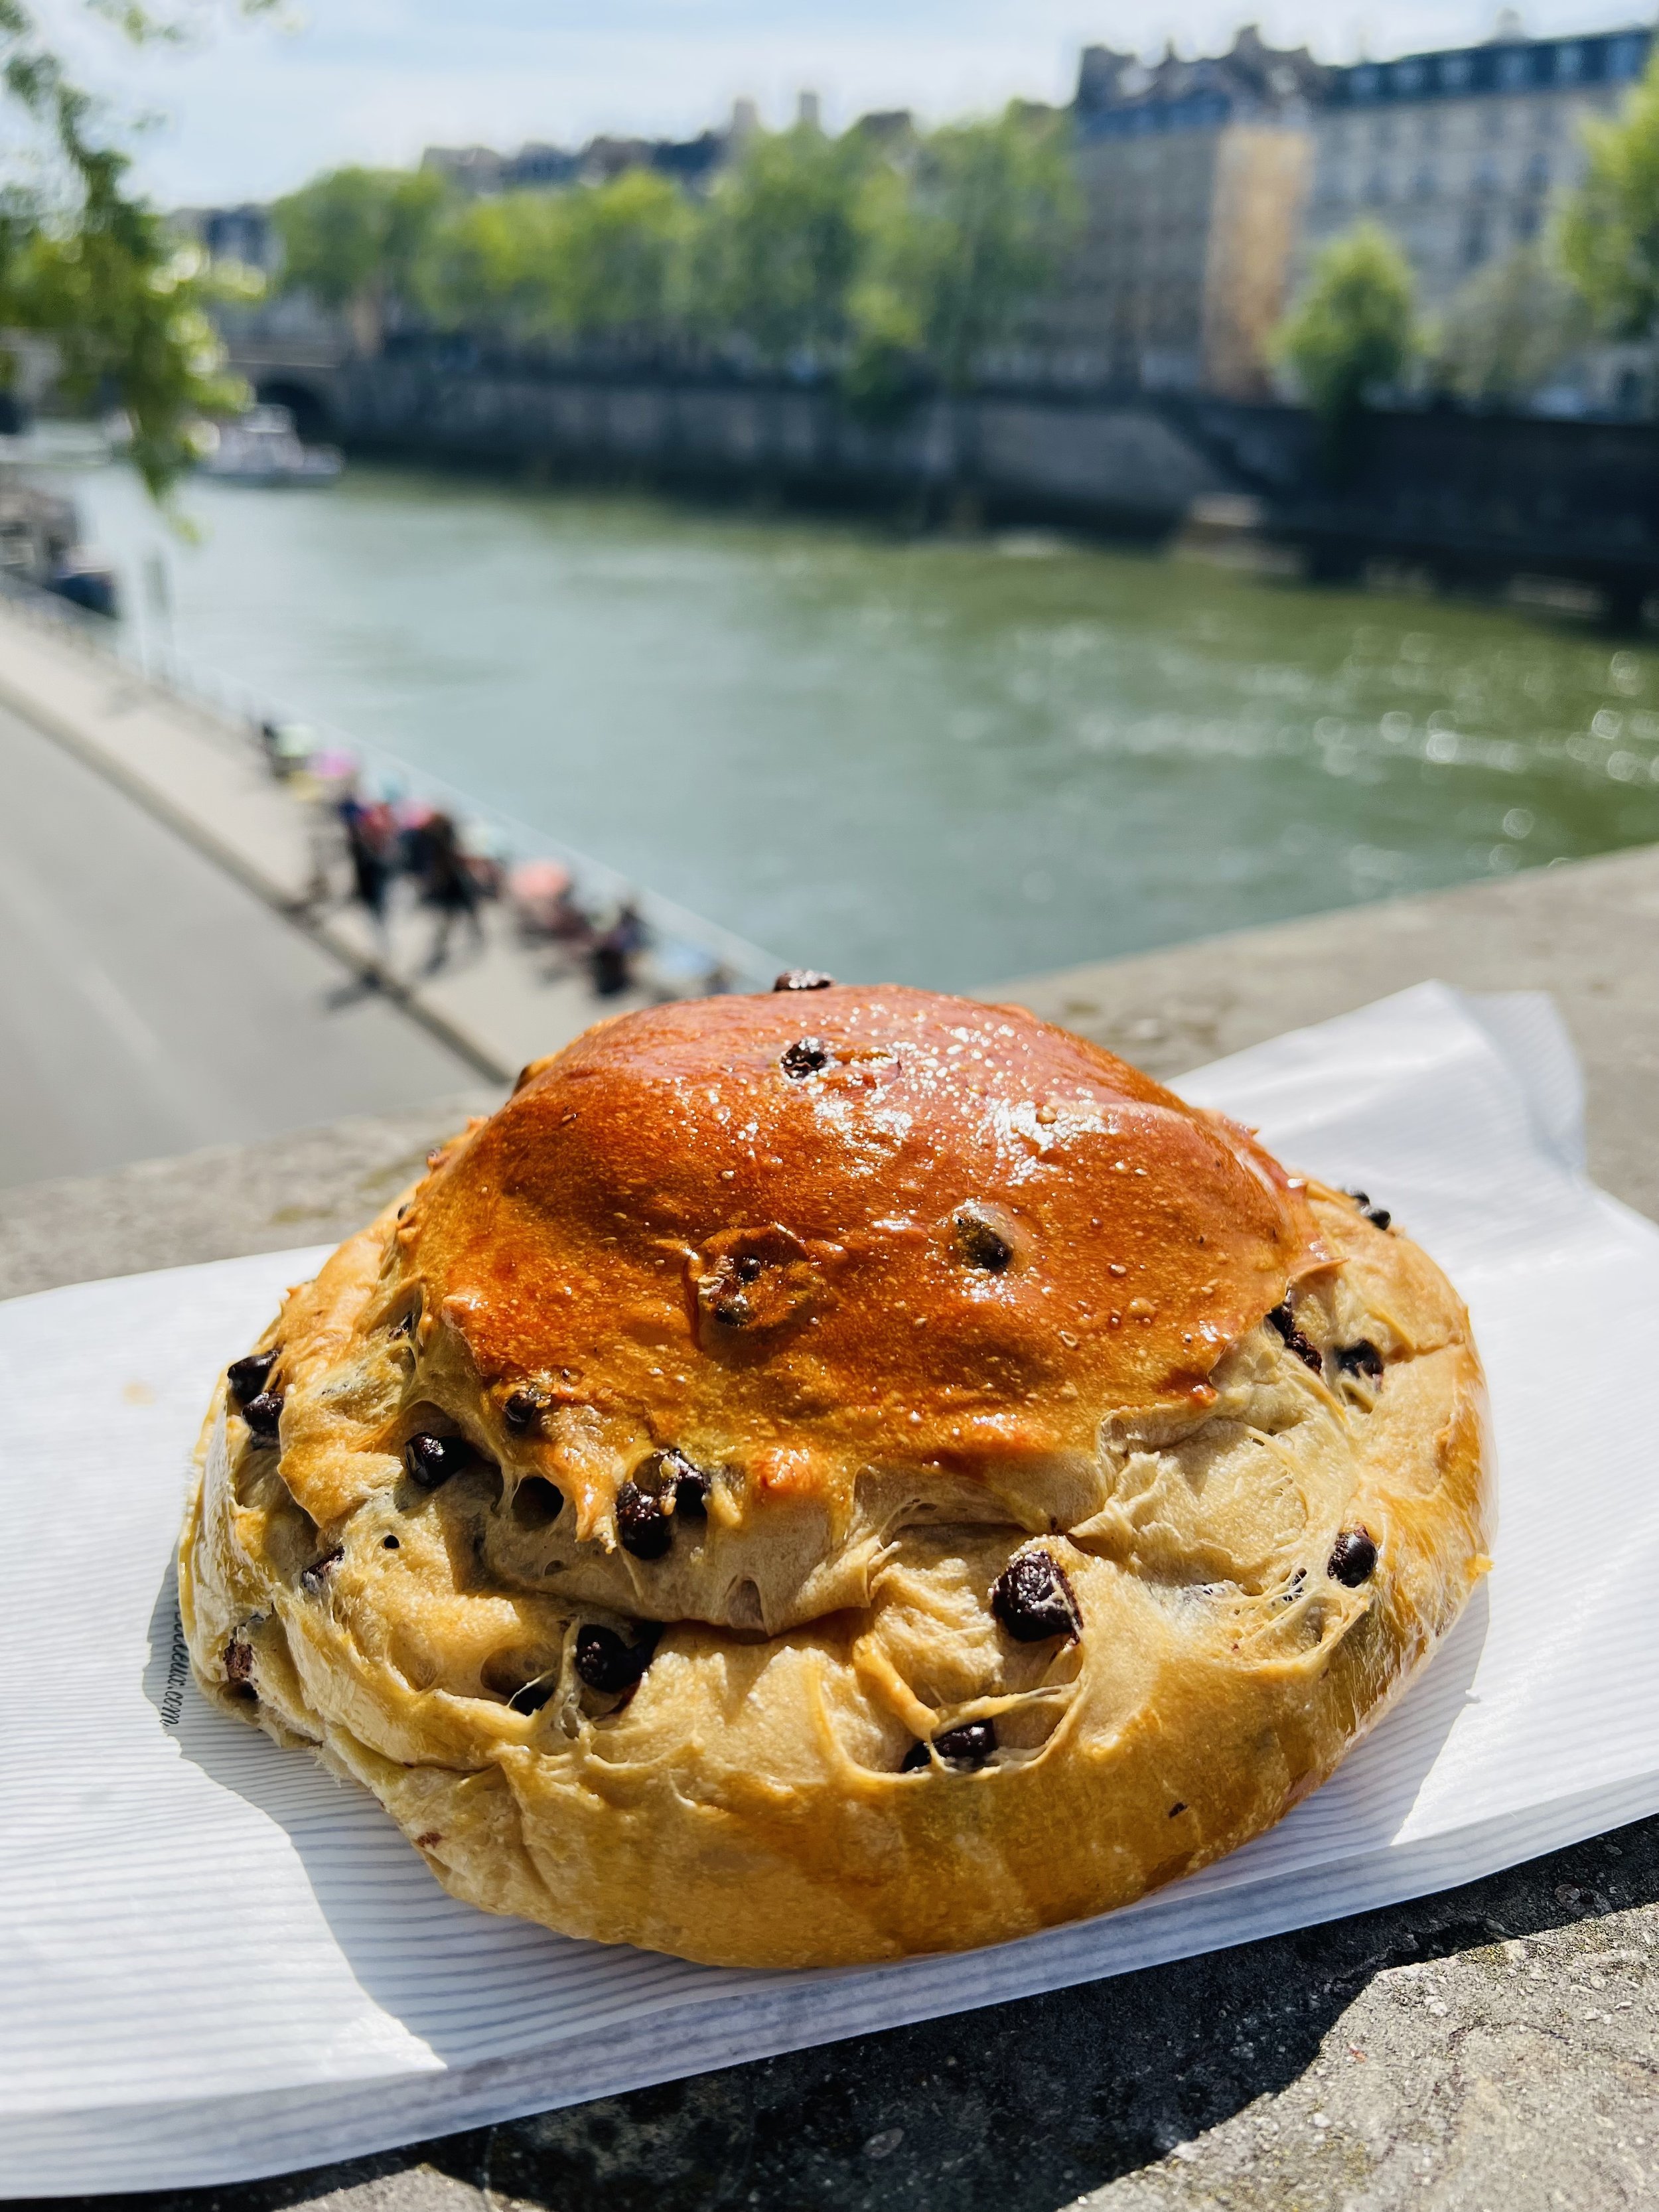 Nathan and Sofie K.’s brioche on Pont Neuf